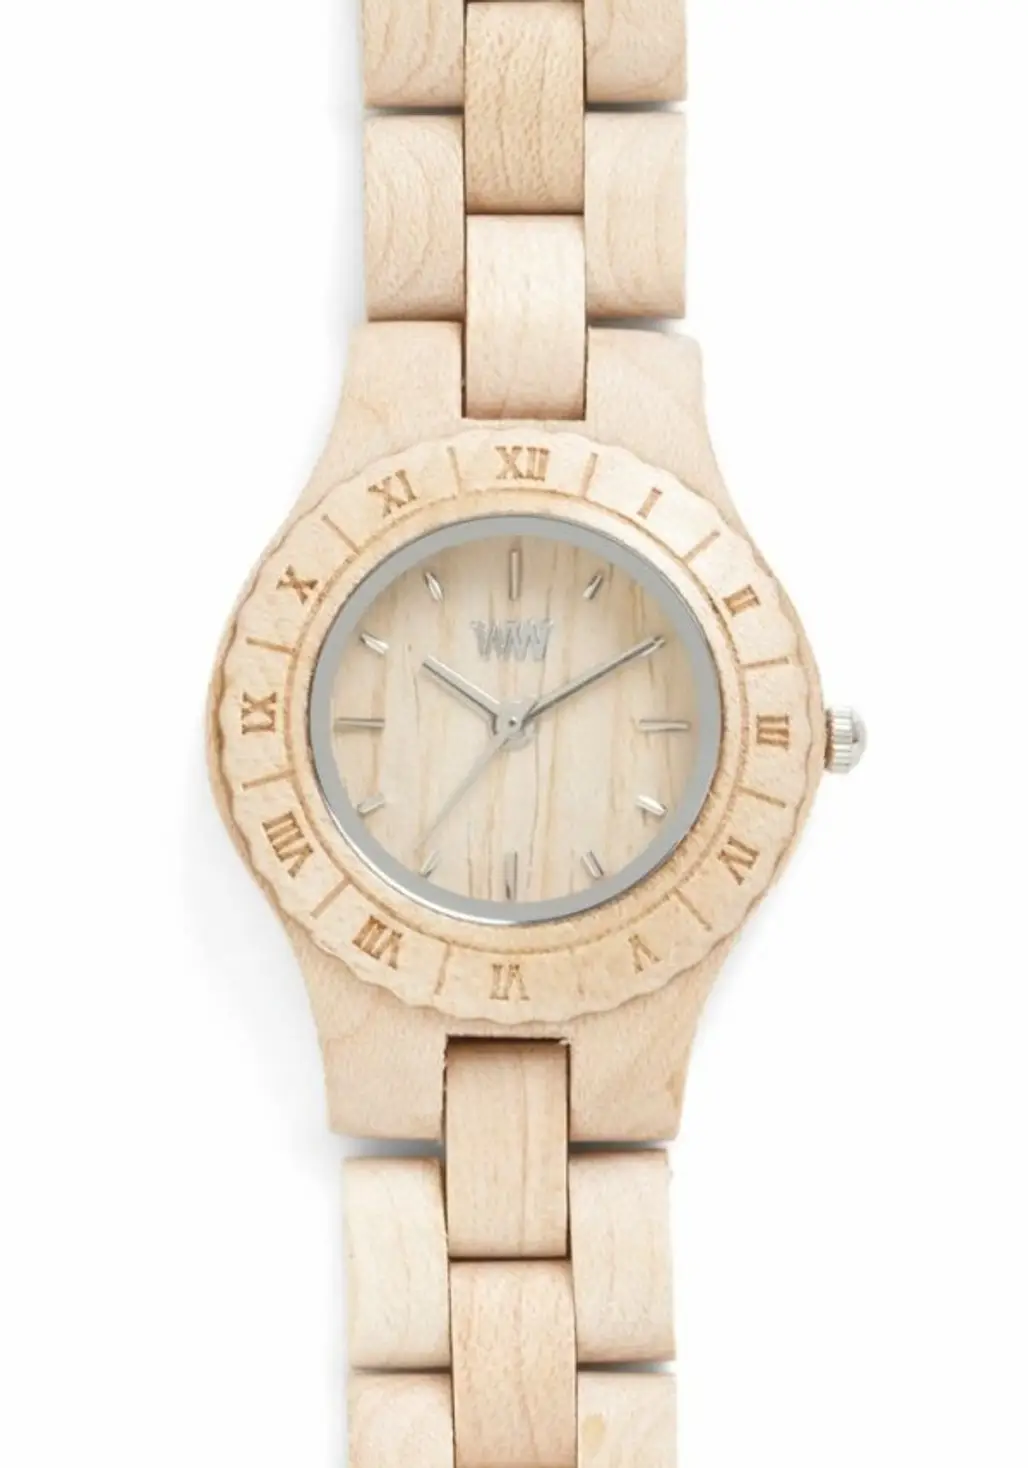 ModCloth’s Wood You Have the Time? Watch